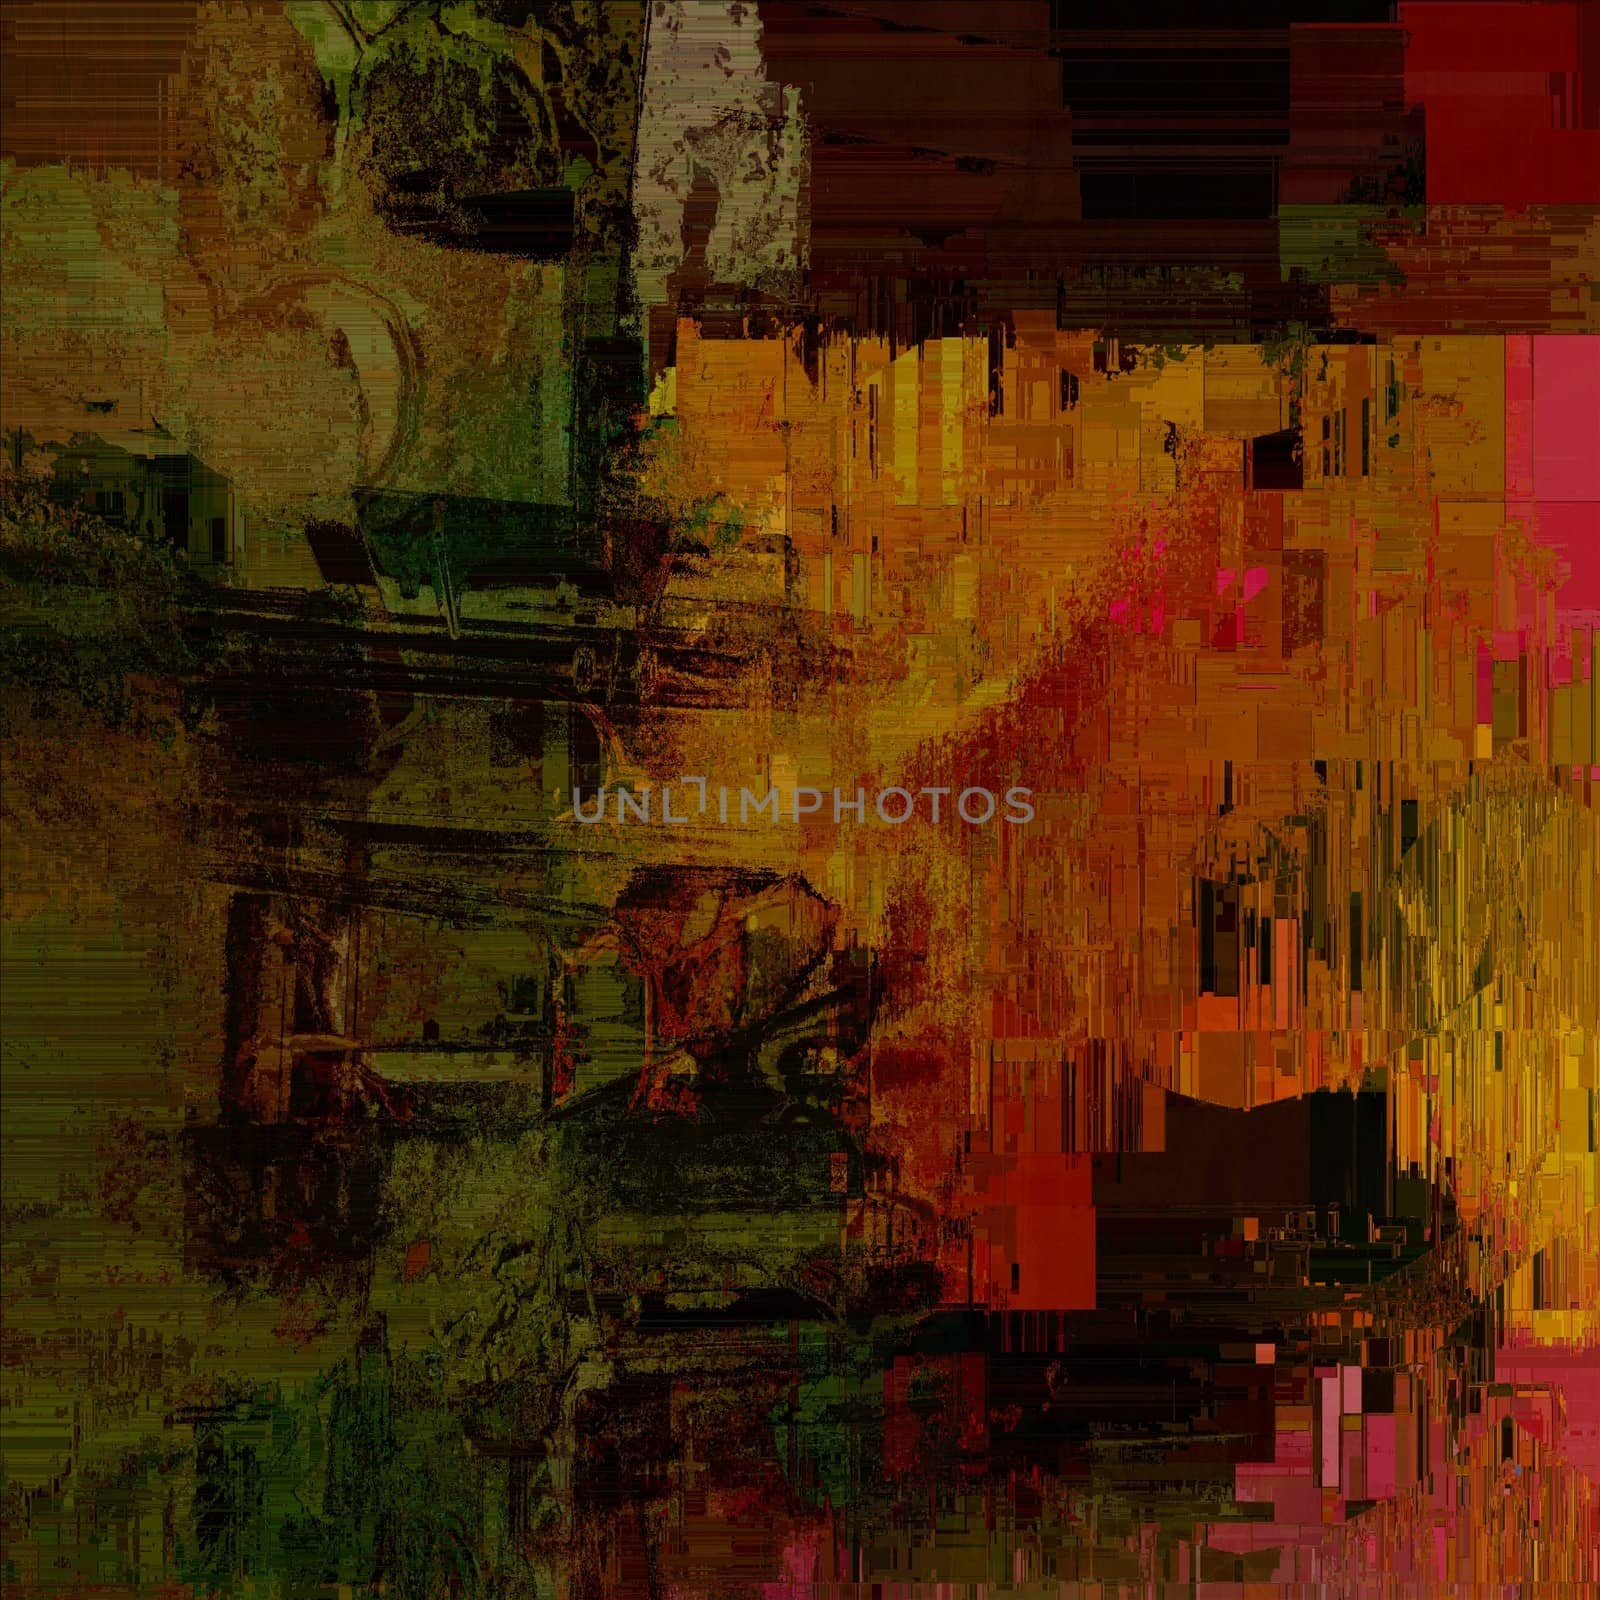 Illustration of a pixelated abstract grunge background